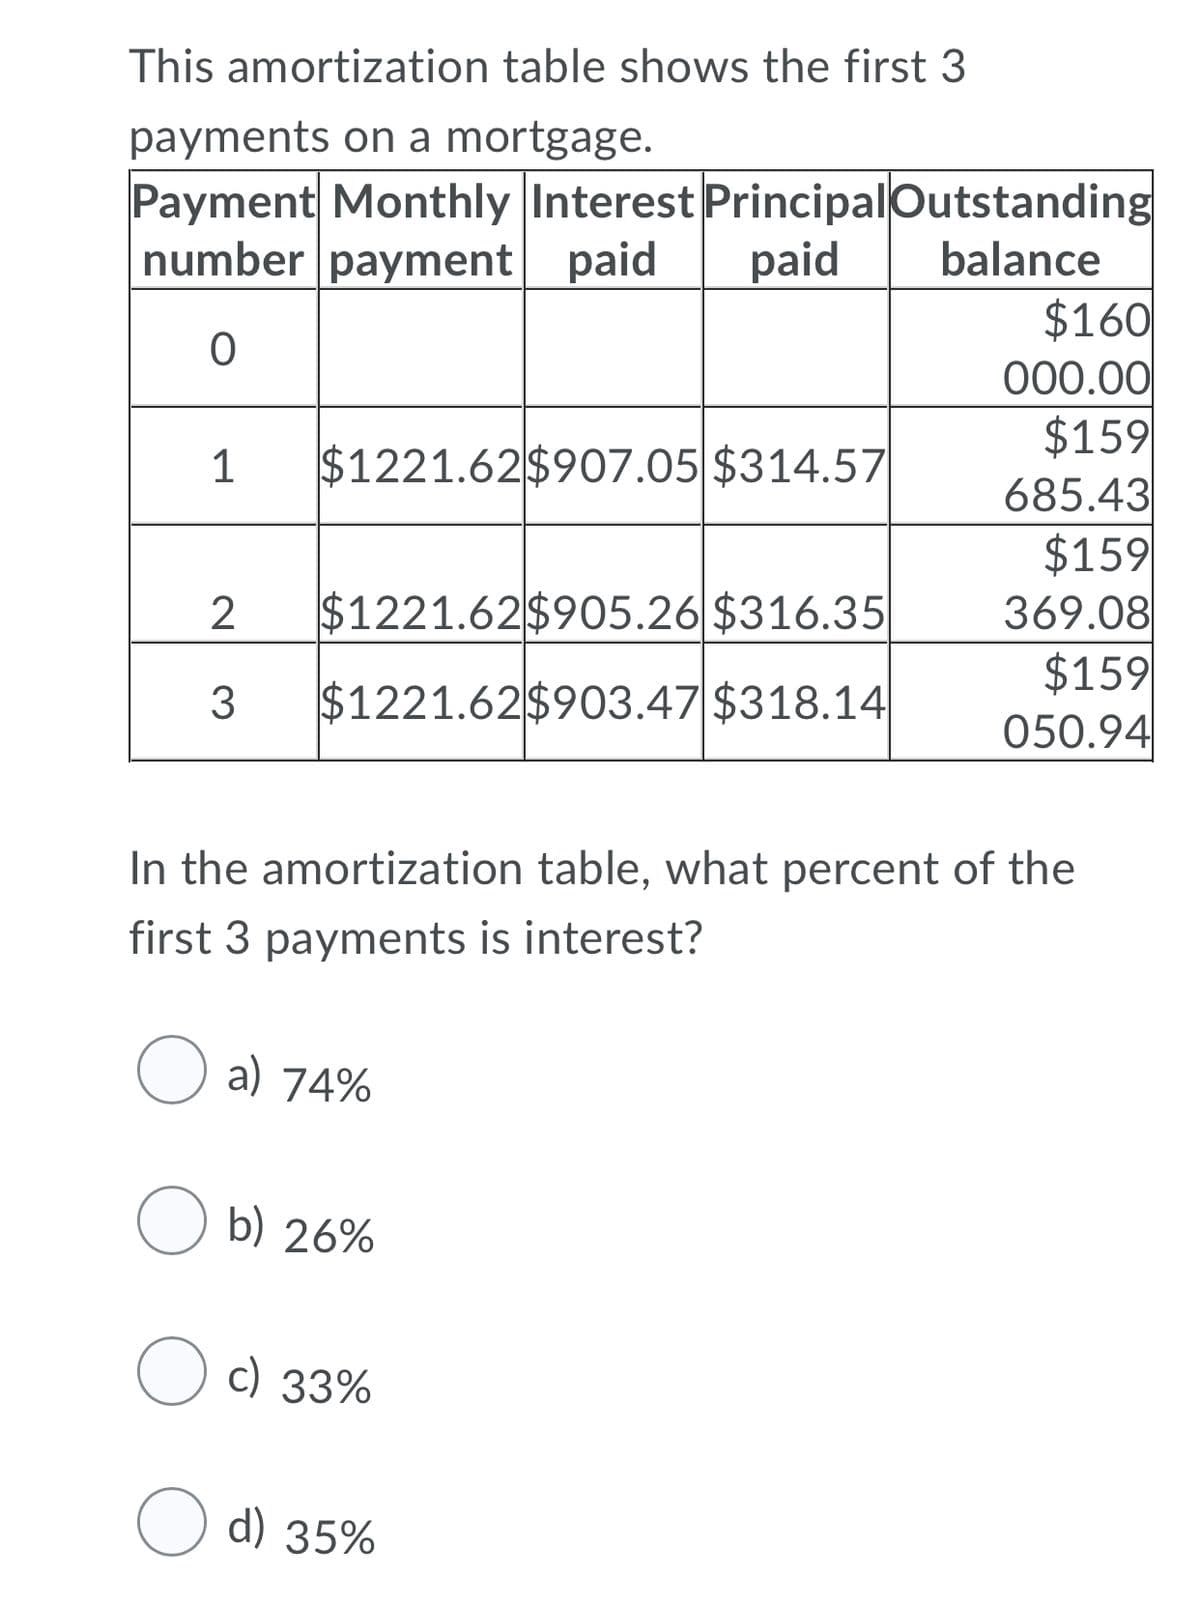 This amortization table shows the first 3
payments on a mortgage.
Payment Monthly Interest PrincipalOutstanding
number payment paid
paid
balance
$160
000.00
$159
685.43
$159
369.08
$159
050.94
1
$1221.62$907.05 $314.57
$1221.62$905.26|$316.35
3
$1221.62$903.47 $318.14
In the amortization table, what percent of the
first 3 payments is interest?
O a) 74%
O b) 26%
O c) 33%
d) 35%
